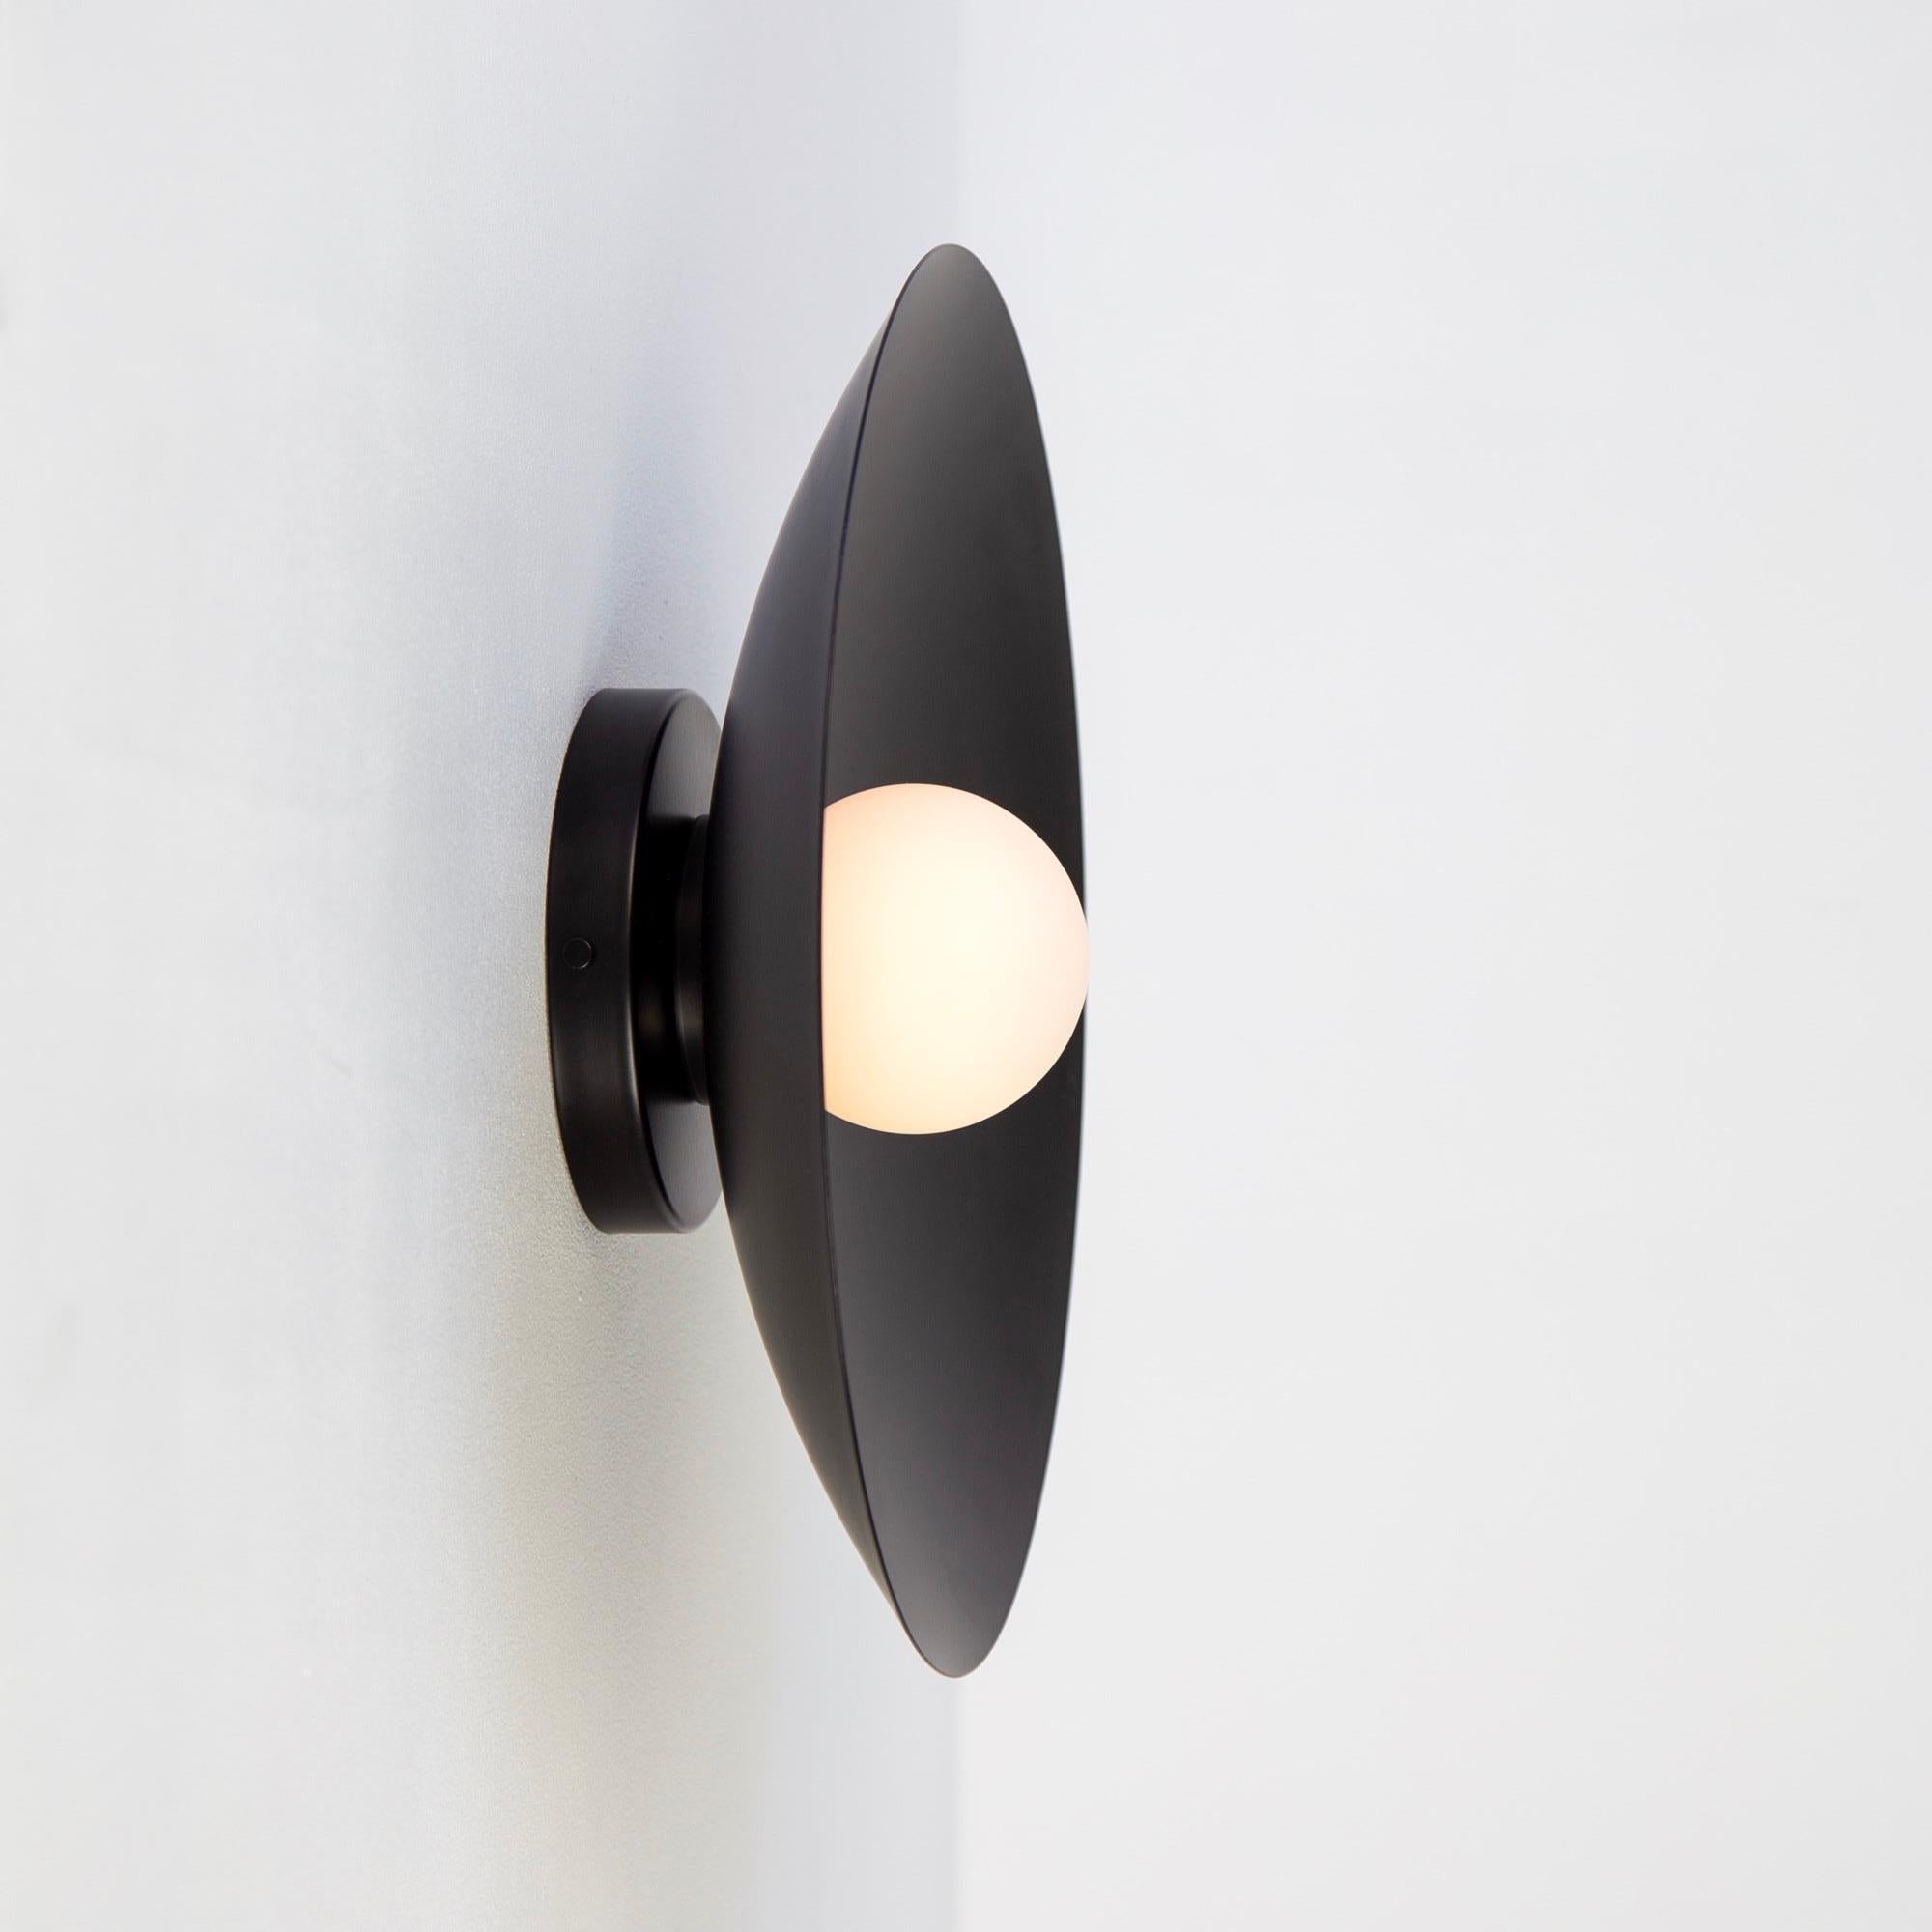 This listing is for 2x Dome Sconces in Black designed and manufactured by Research.Lighting.

Materials: Steel, Brass & Glass
Finish: Powder Coated Steel in black
Electronics: 1x G9 Socket, 4.5 Watt LED Bulb (included), 450 Lumens
UL Listed. Made in